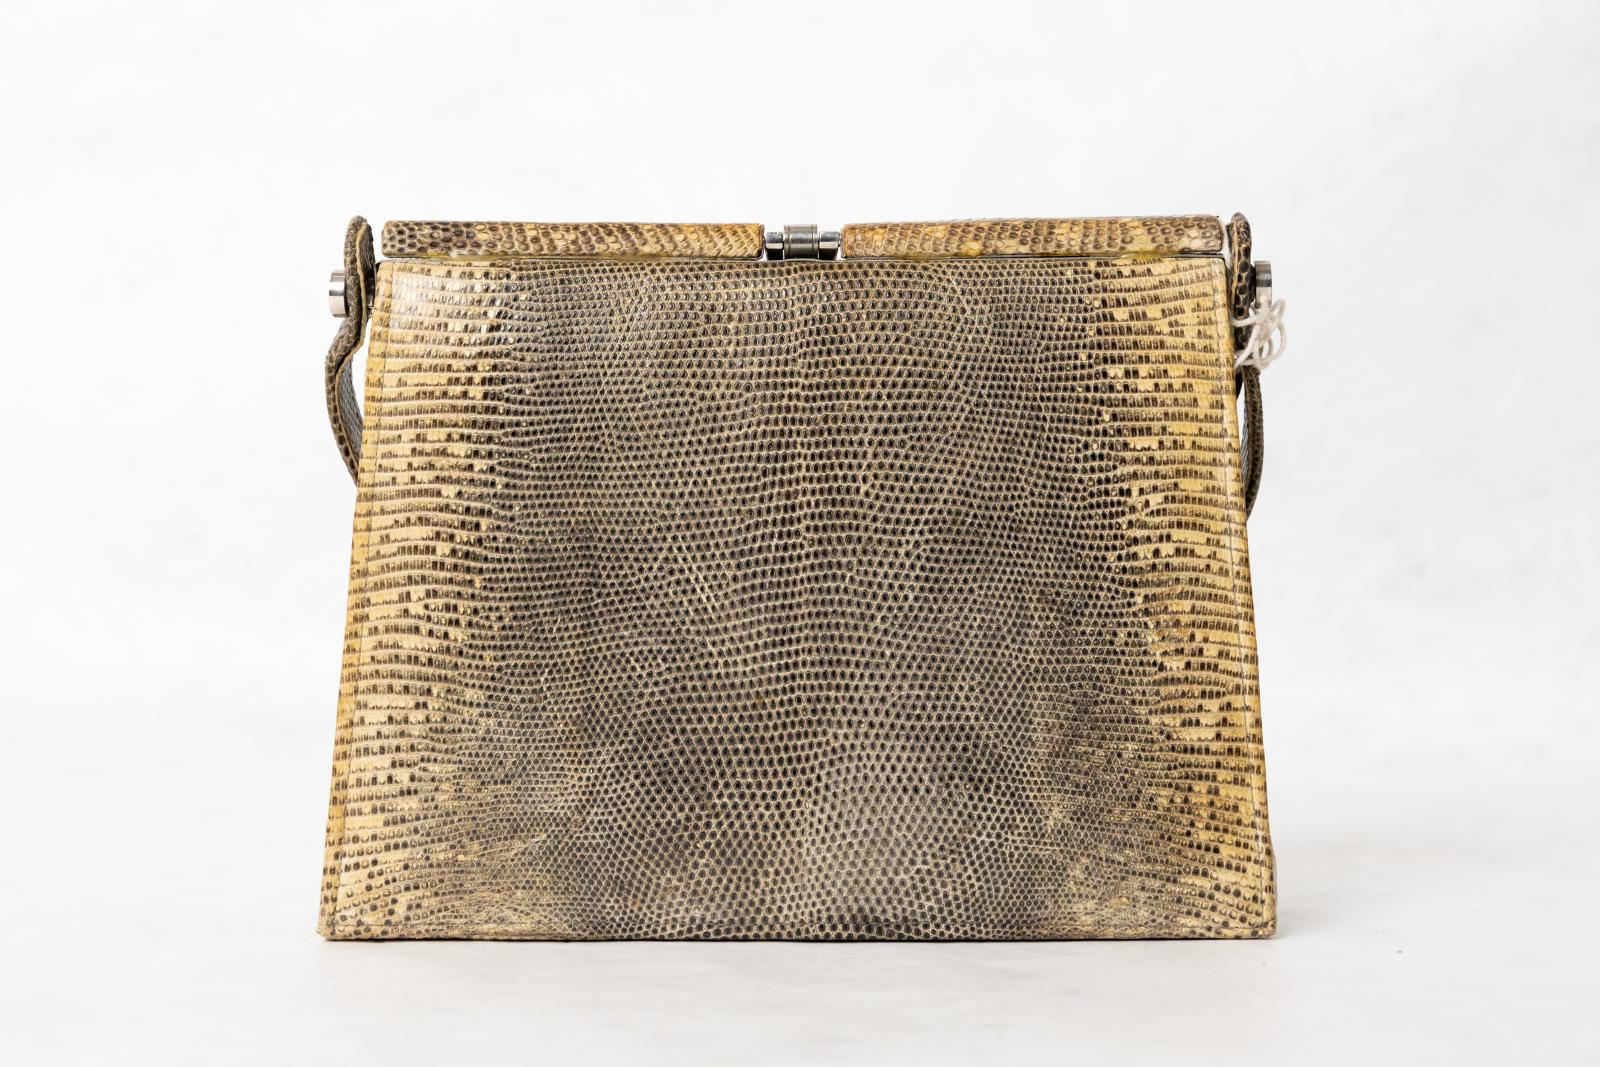 Yellow, dark brown and black snakeskin handbag with short strap and metal clasp on top. The interior is possibly brown leather and is divided into two compartments. The first compartment has two additional pockets and the other compartment is divided into two with one zipped pocket, between these compartments is a zipped pocket.